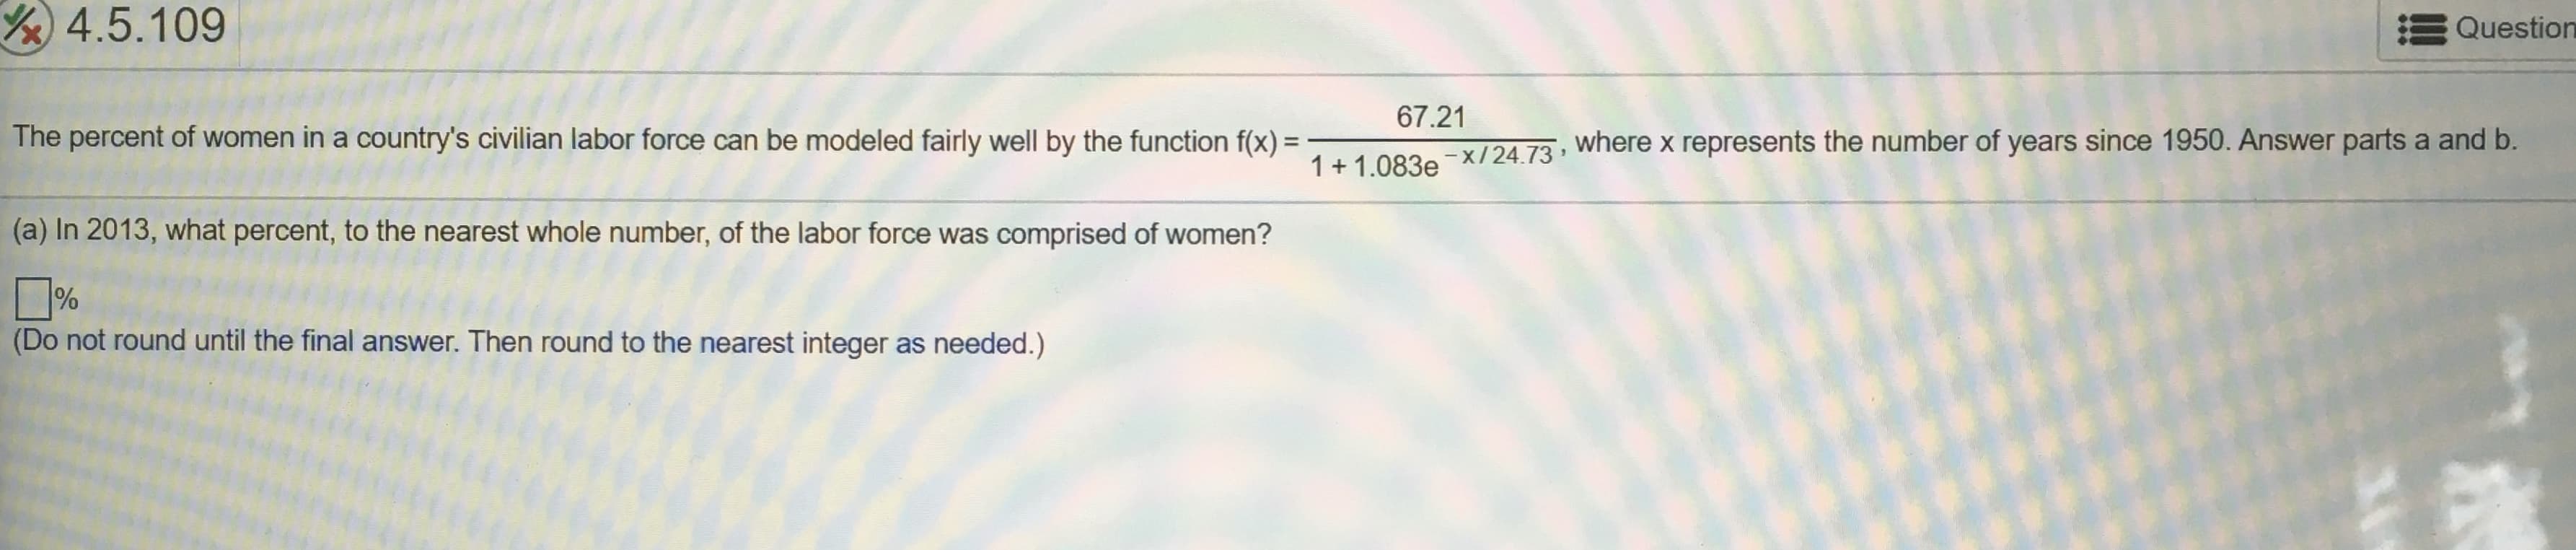 Y4.5.109
Question
67.21
The percent of women in a country's civilian labor force can be modeled fairly well by the function f(x) =
where x represents the number of years since 1950. Answer parts a and b.
%3D
1+ 1.083e
-x/24.73
(a) In 2013, what percent, to the nearest whole number, of the labor force was comprised of women?
%
(Do not round until the final answer. Then round to the nearest integer as needed.)
